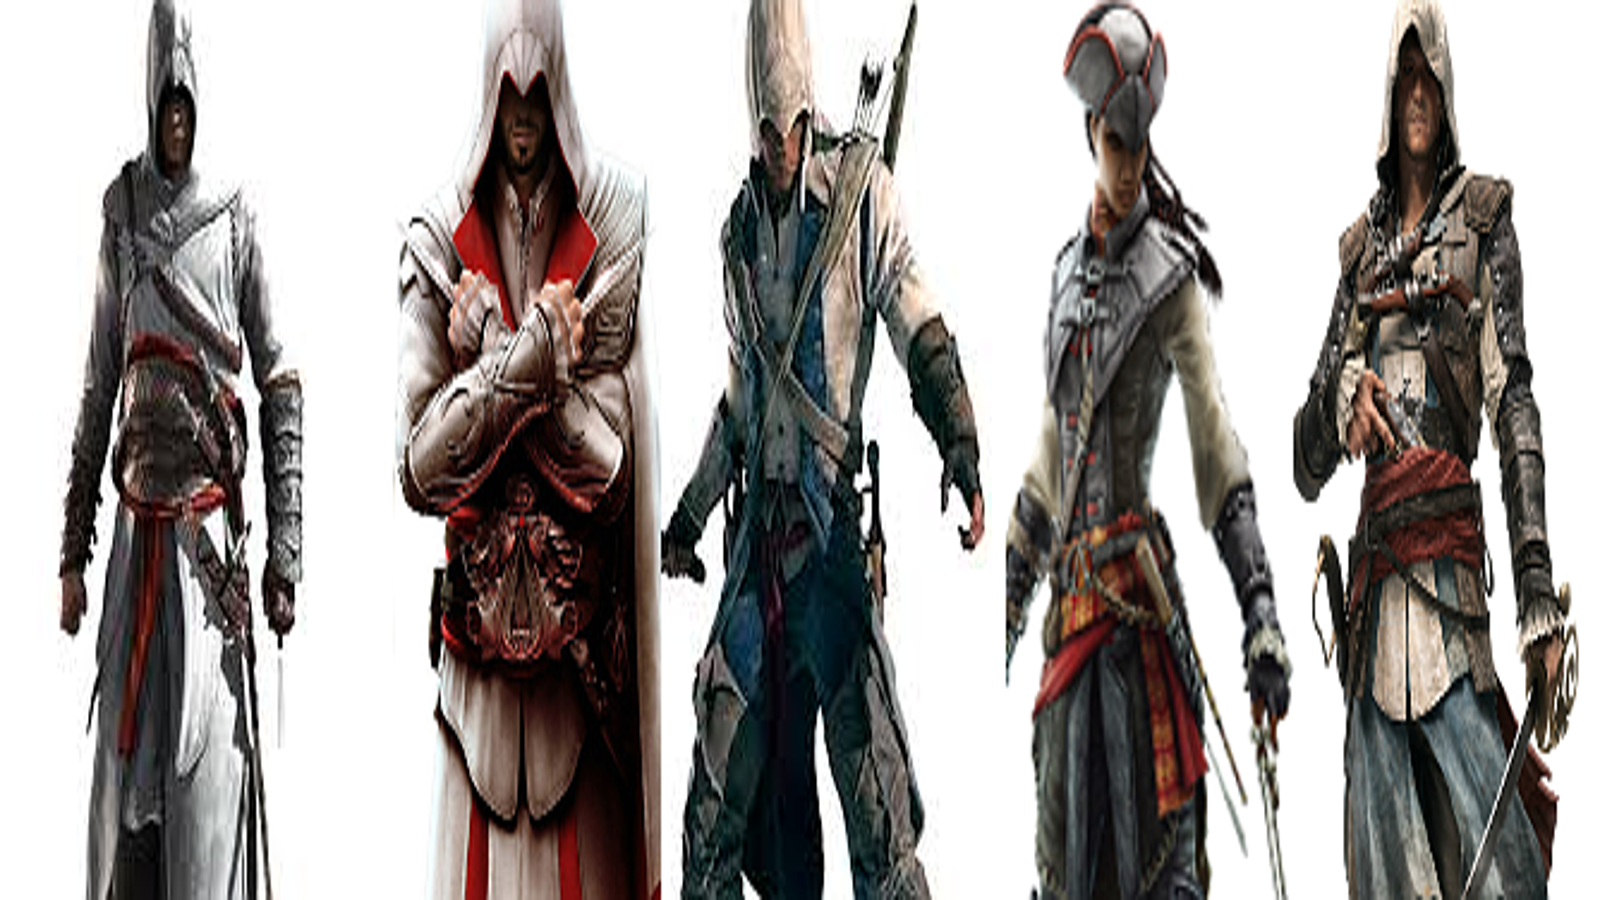 Assassin's Creed in Video Game Titles 